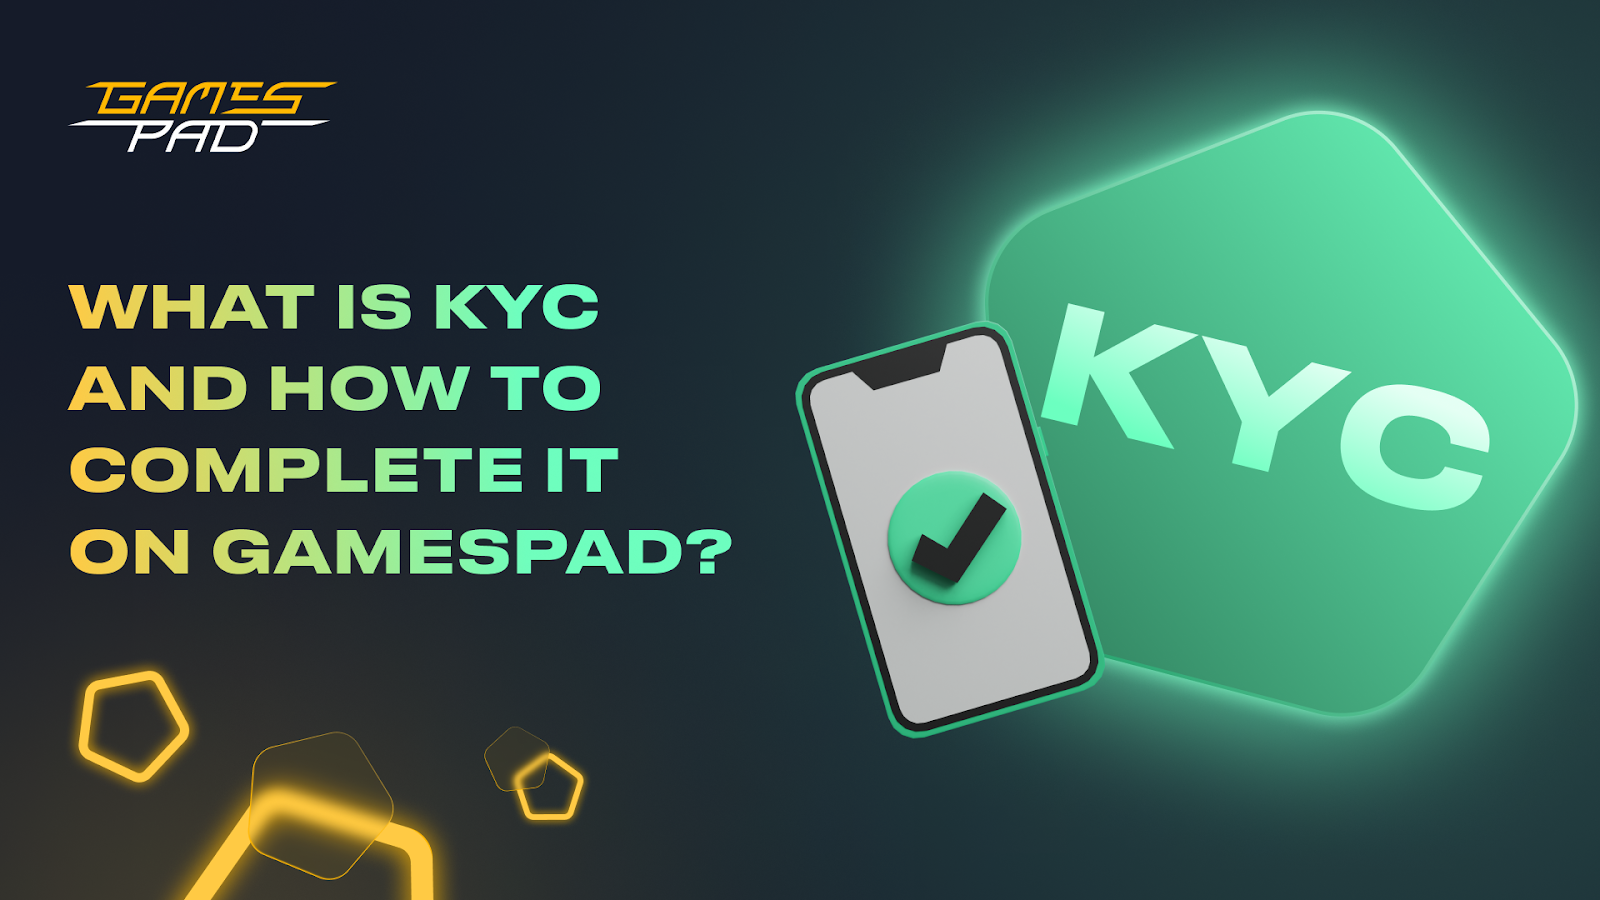 GamesPad: What Is KYC and How to Complete it on GamesPad? 1